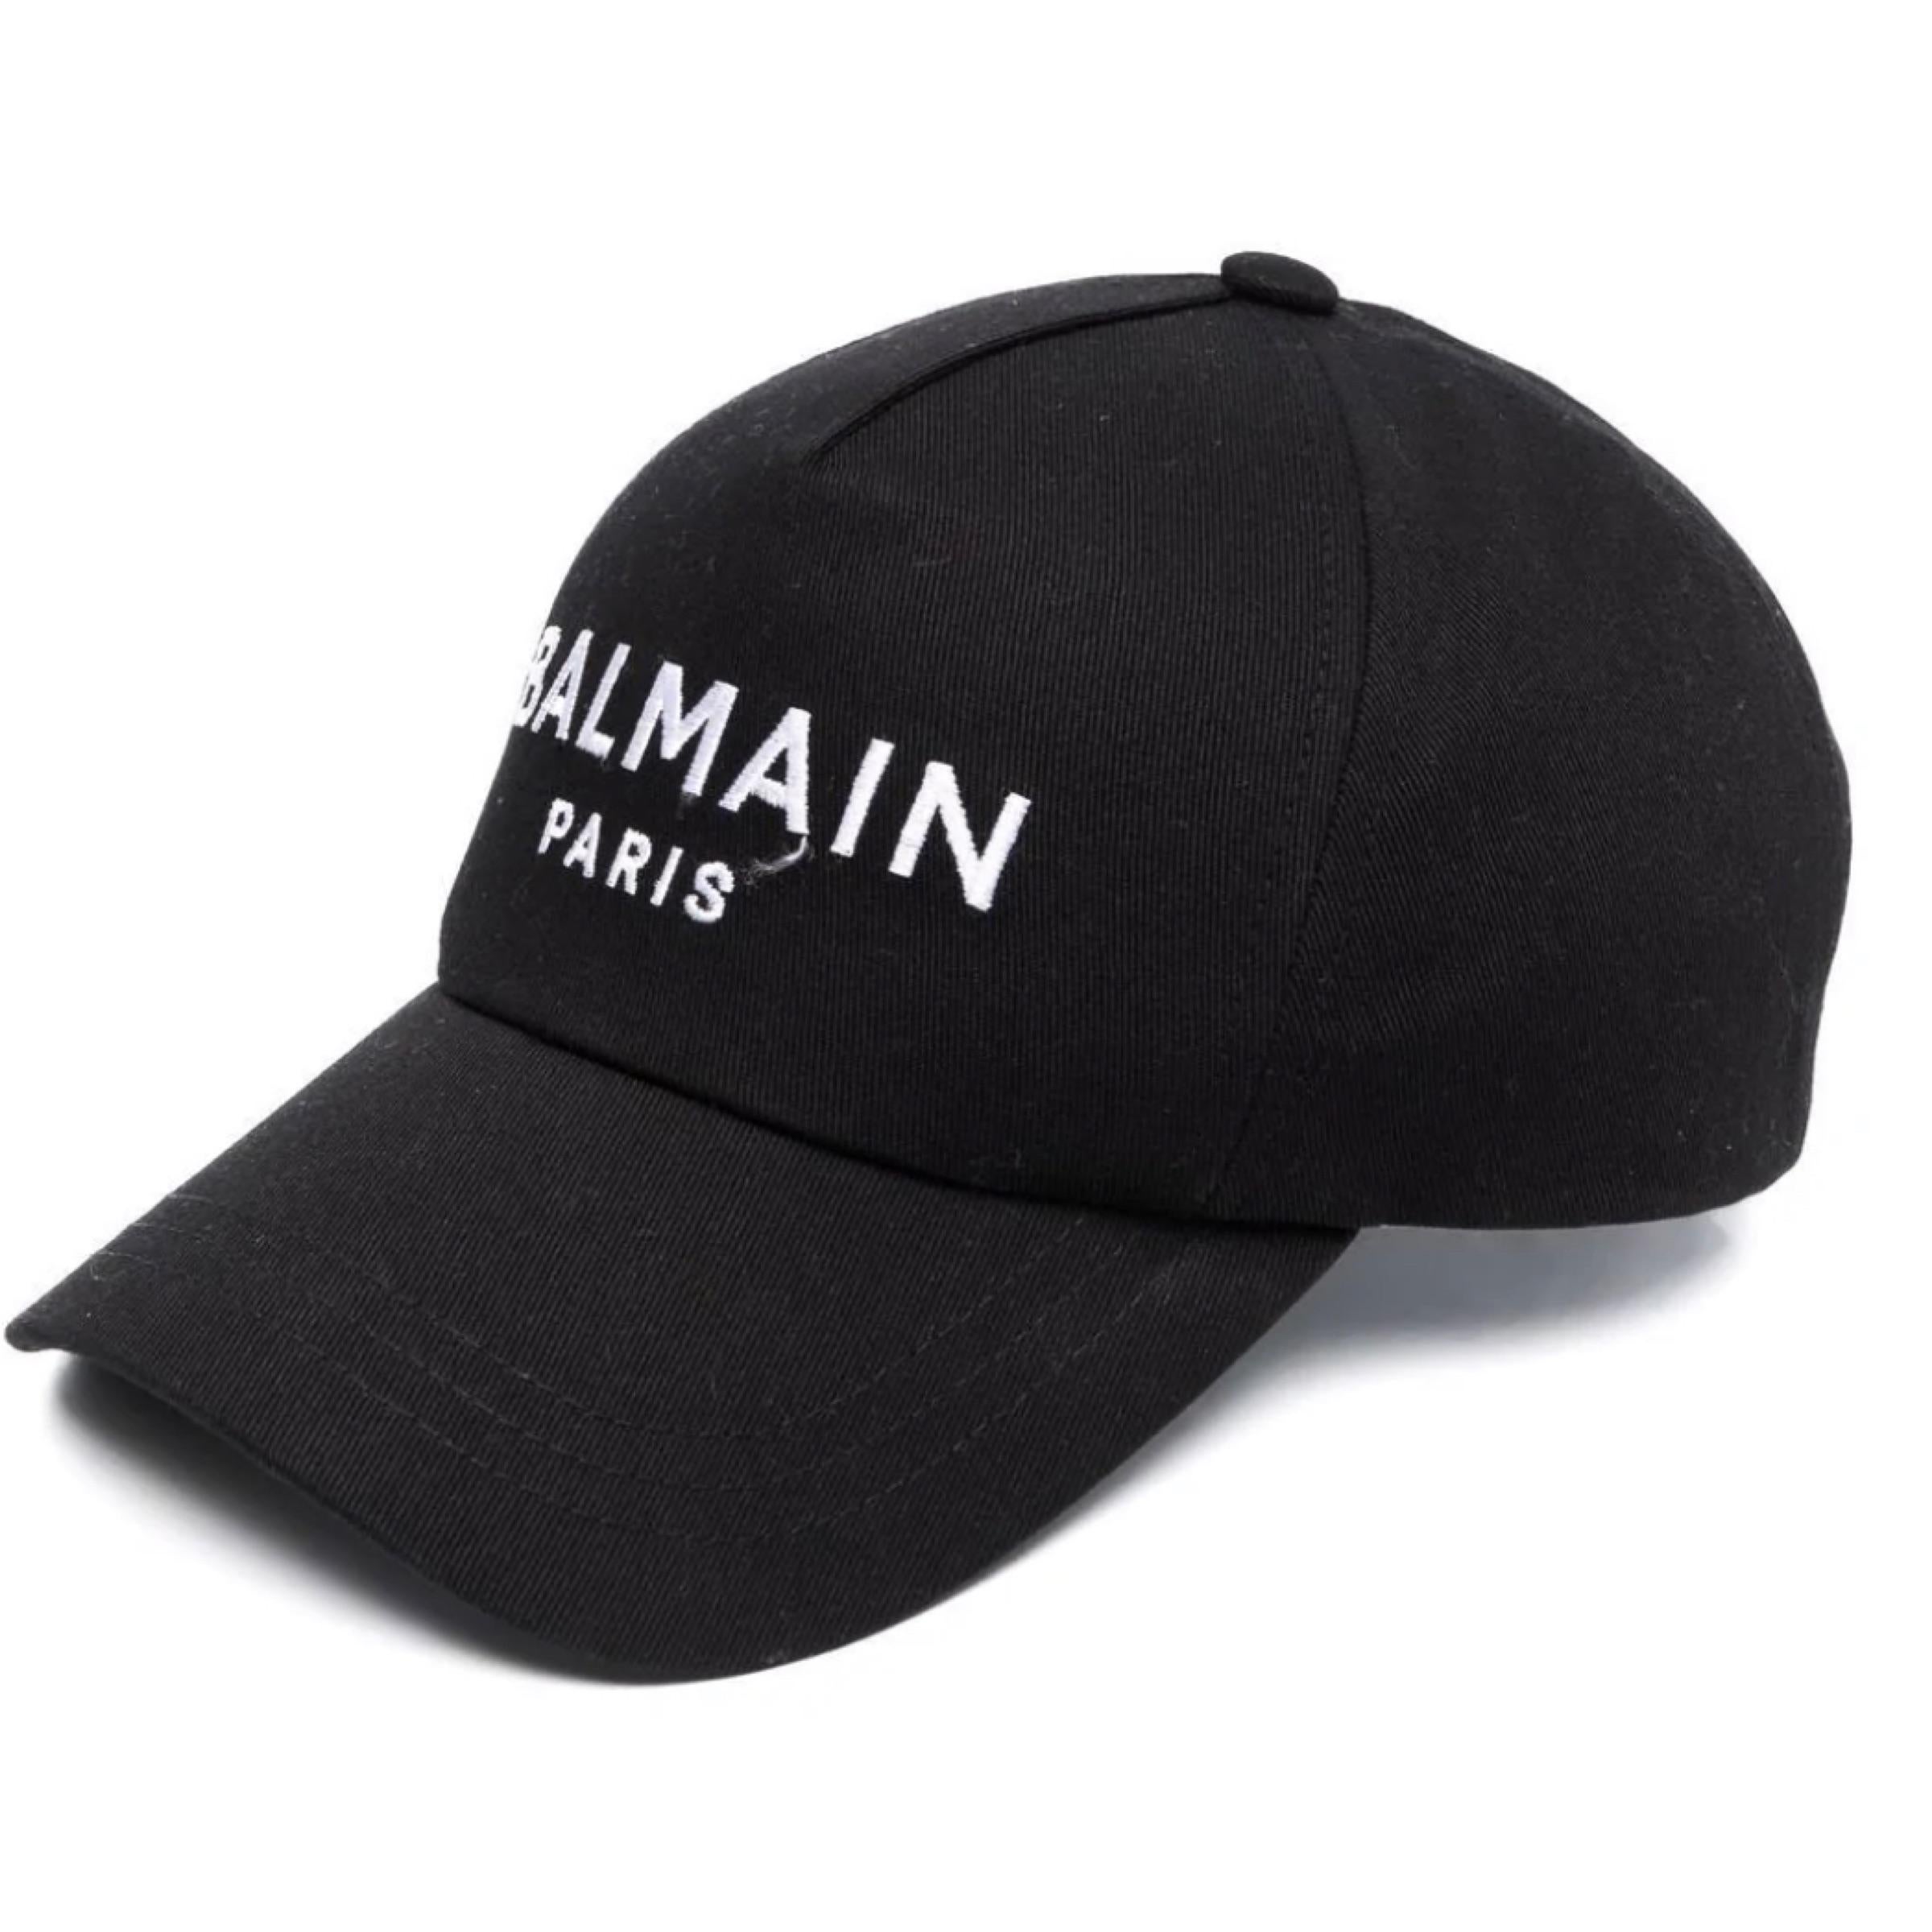 New Balmain Black Front Logo Cotton Cap In New Condition For Sale In San Marcos, CA